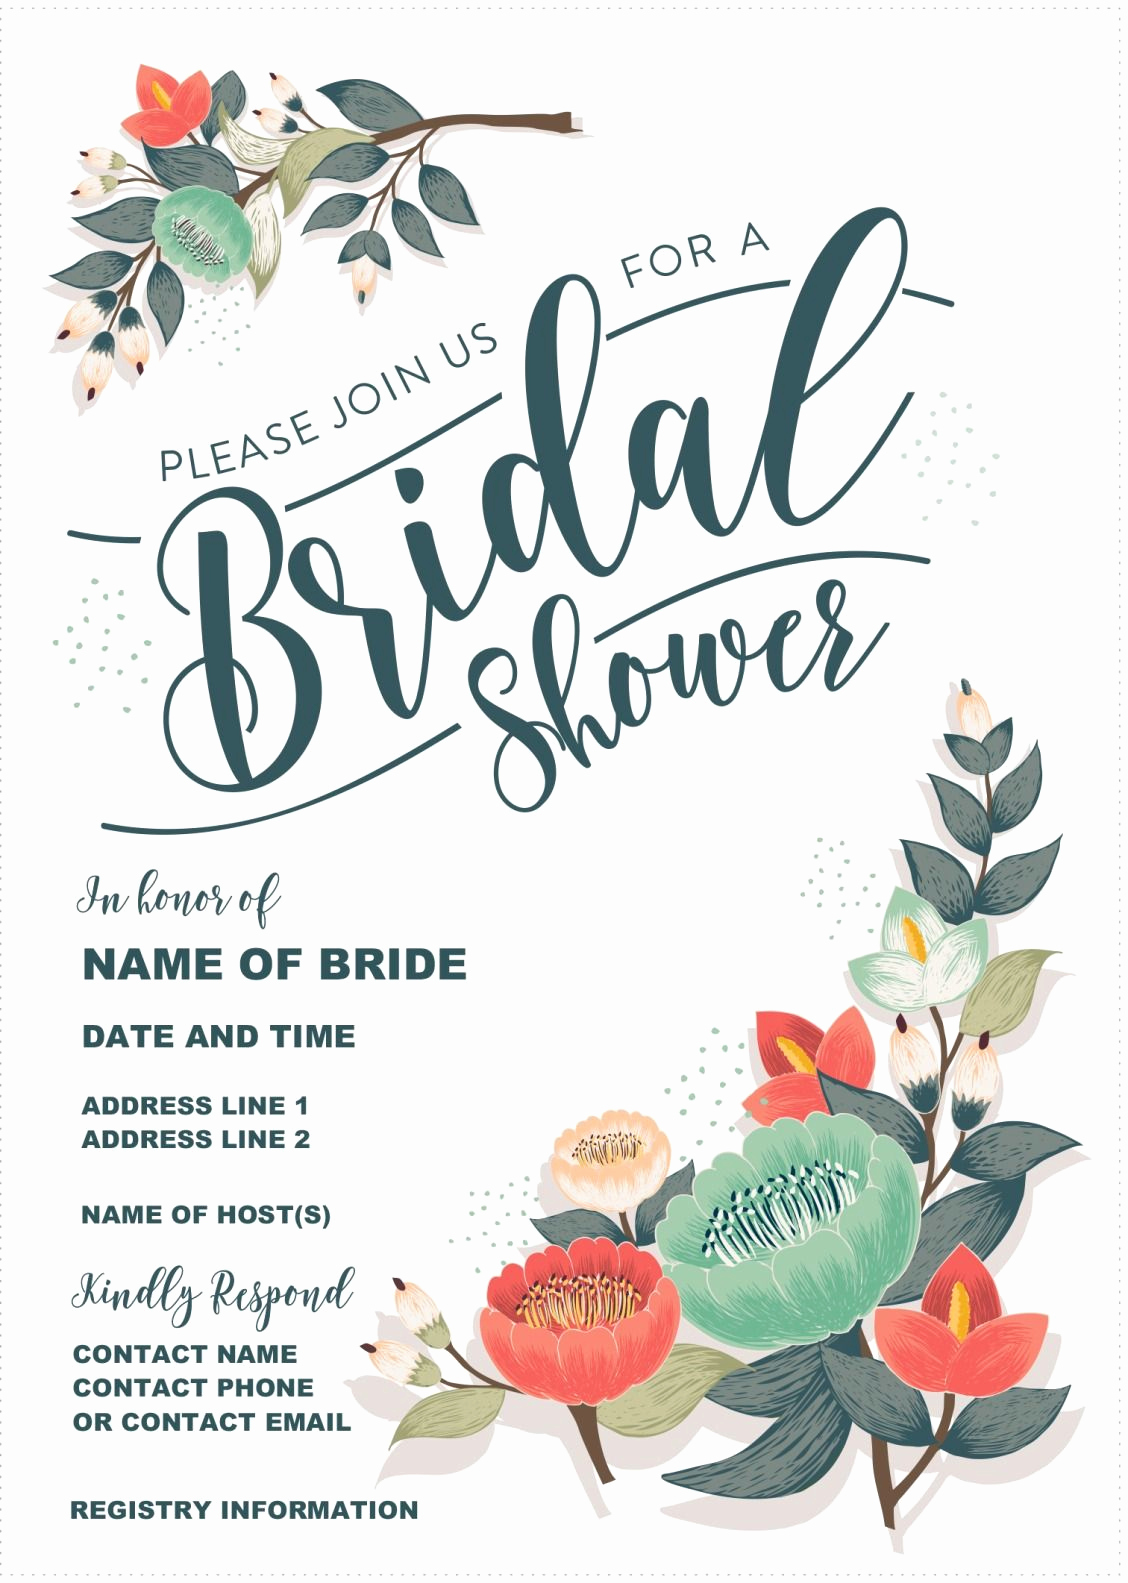 Printable Bridal Shower Invitations New Our Gorgeous Printable Bridal Shower Invitation is totally